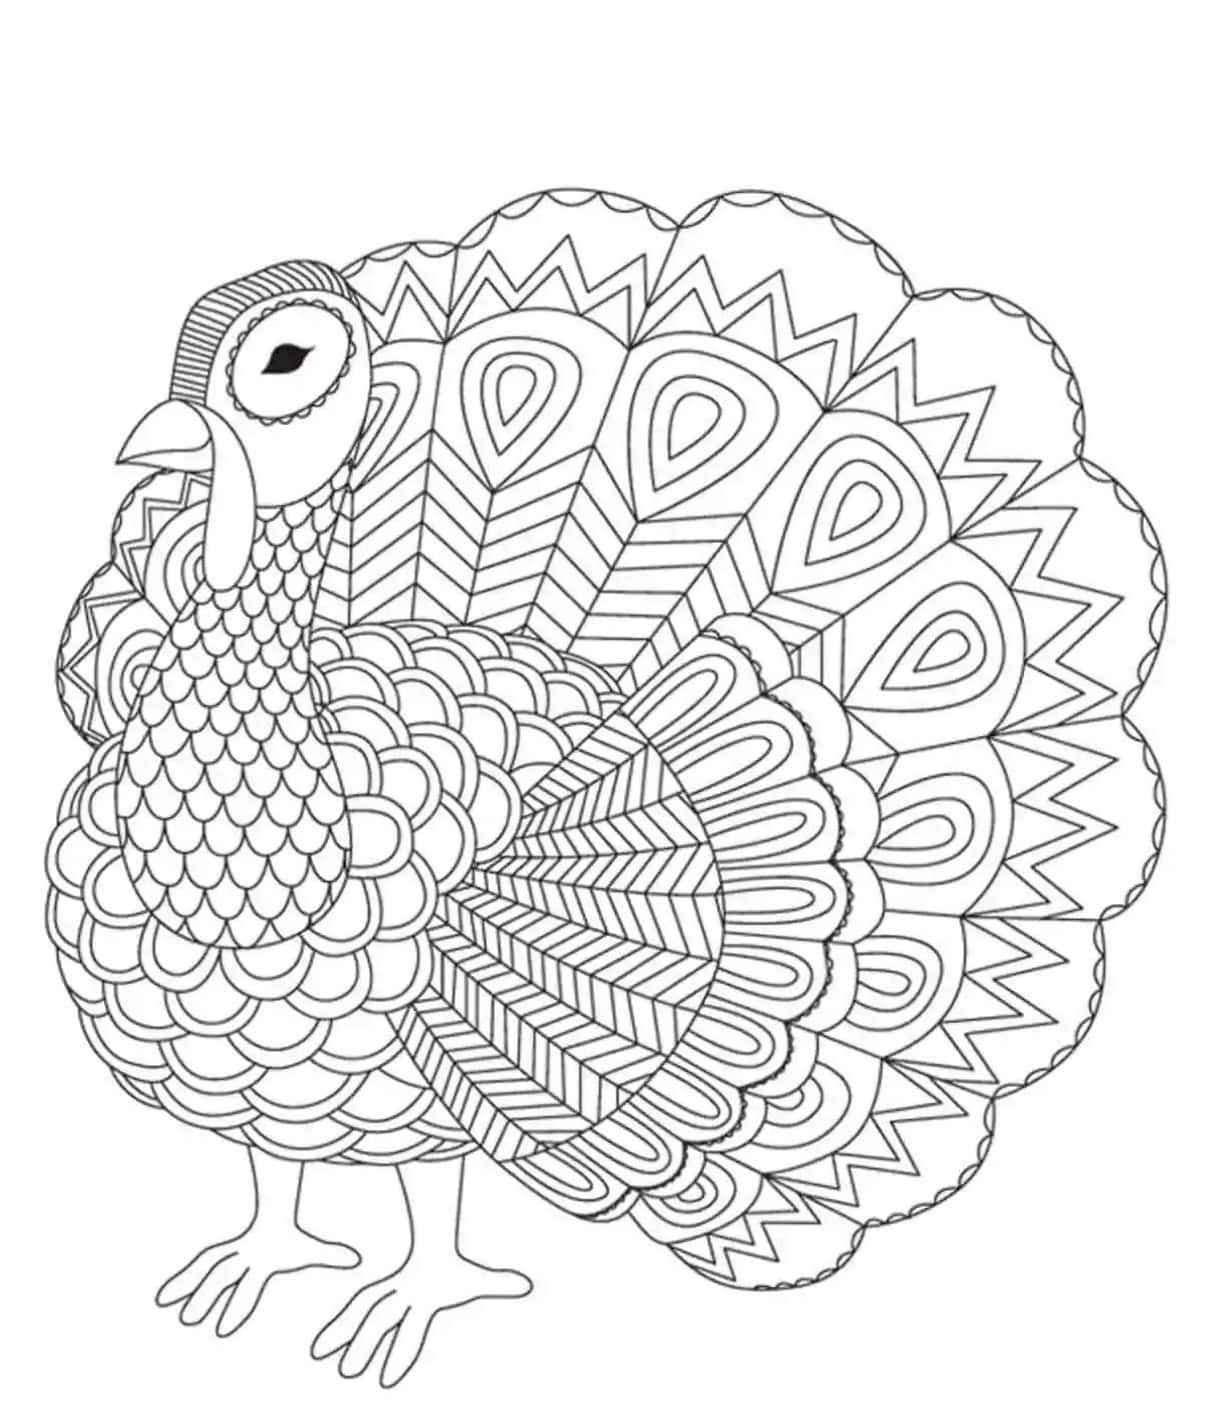 Color in the turkey for hours of fun and creativity!